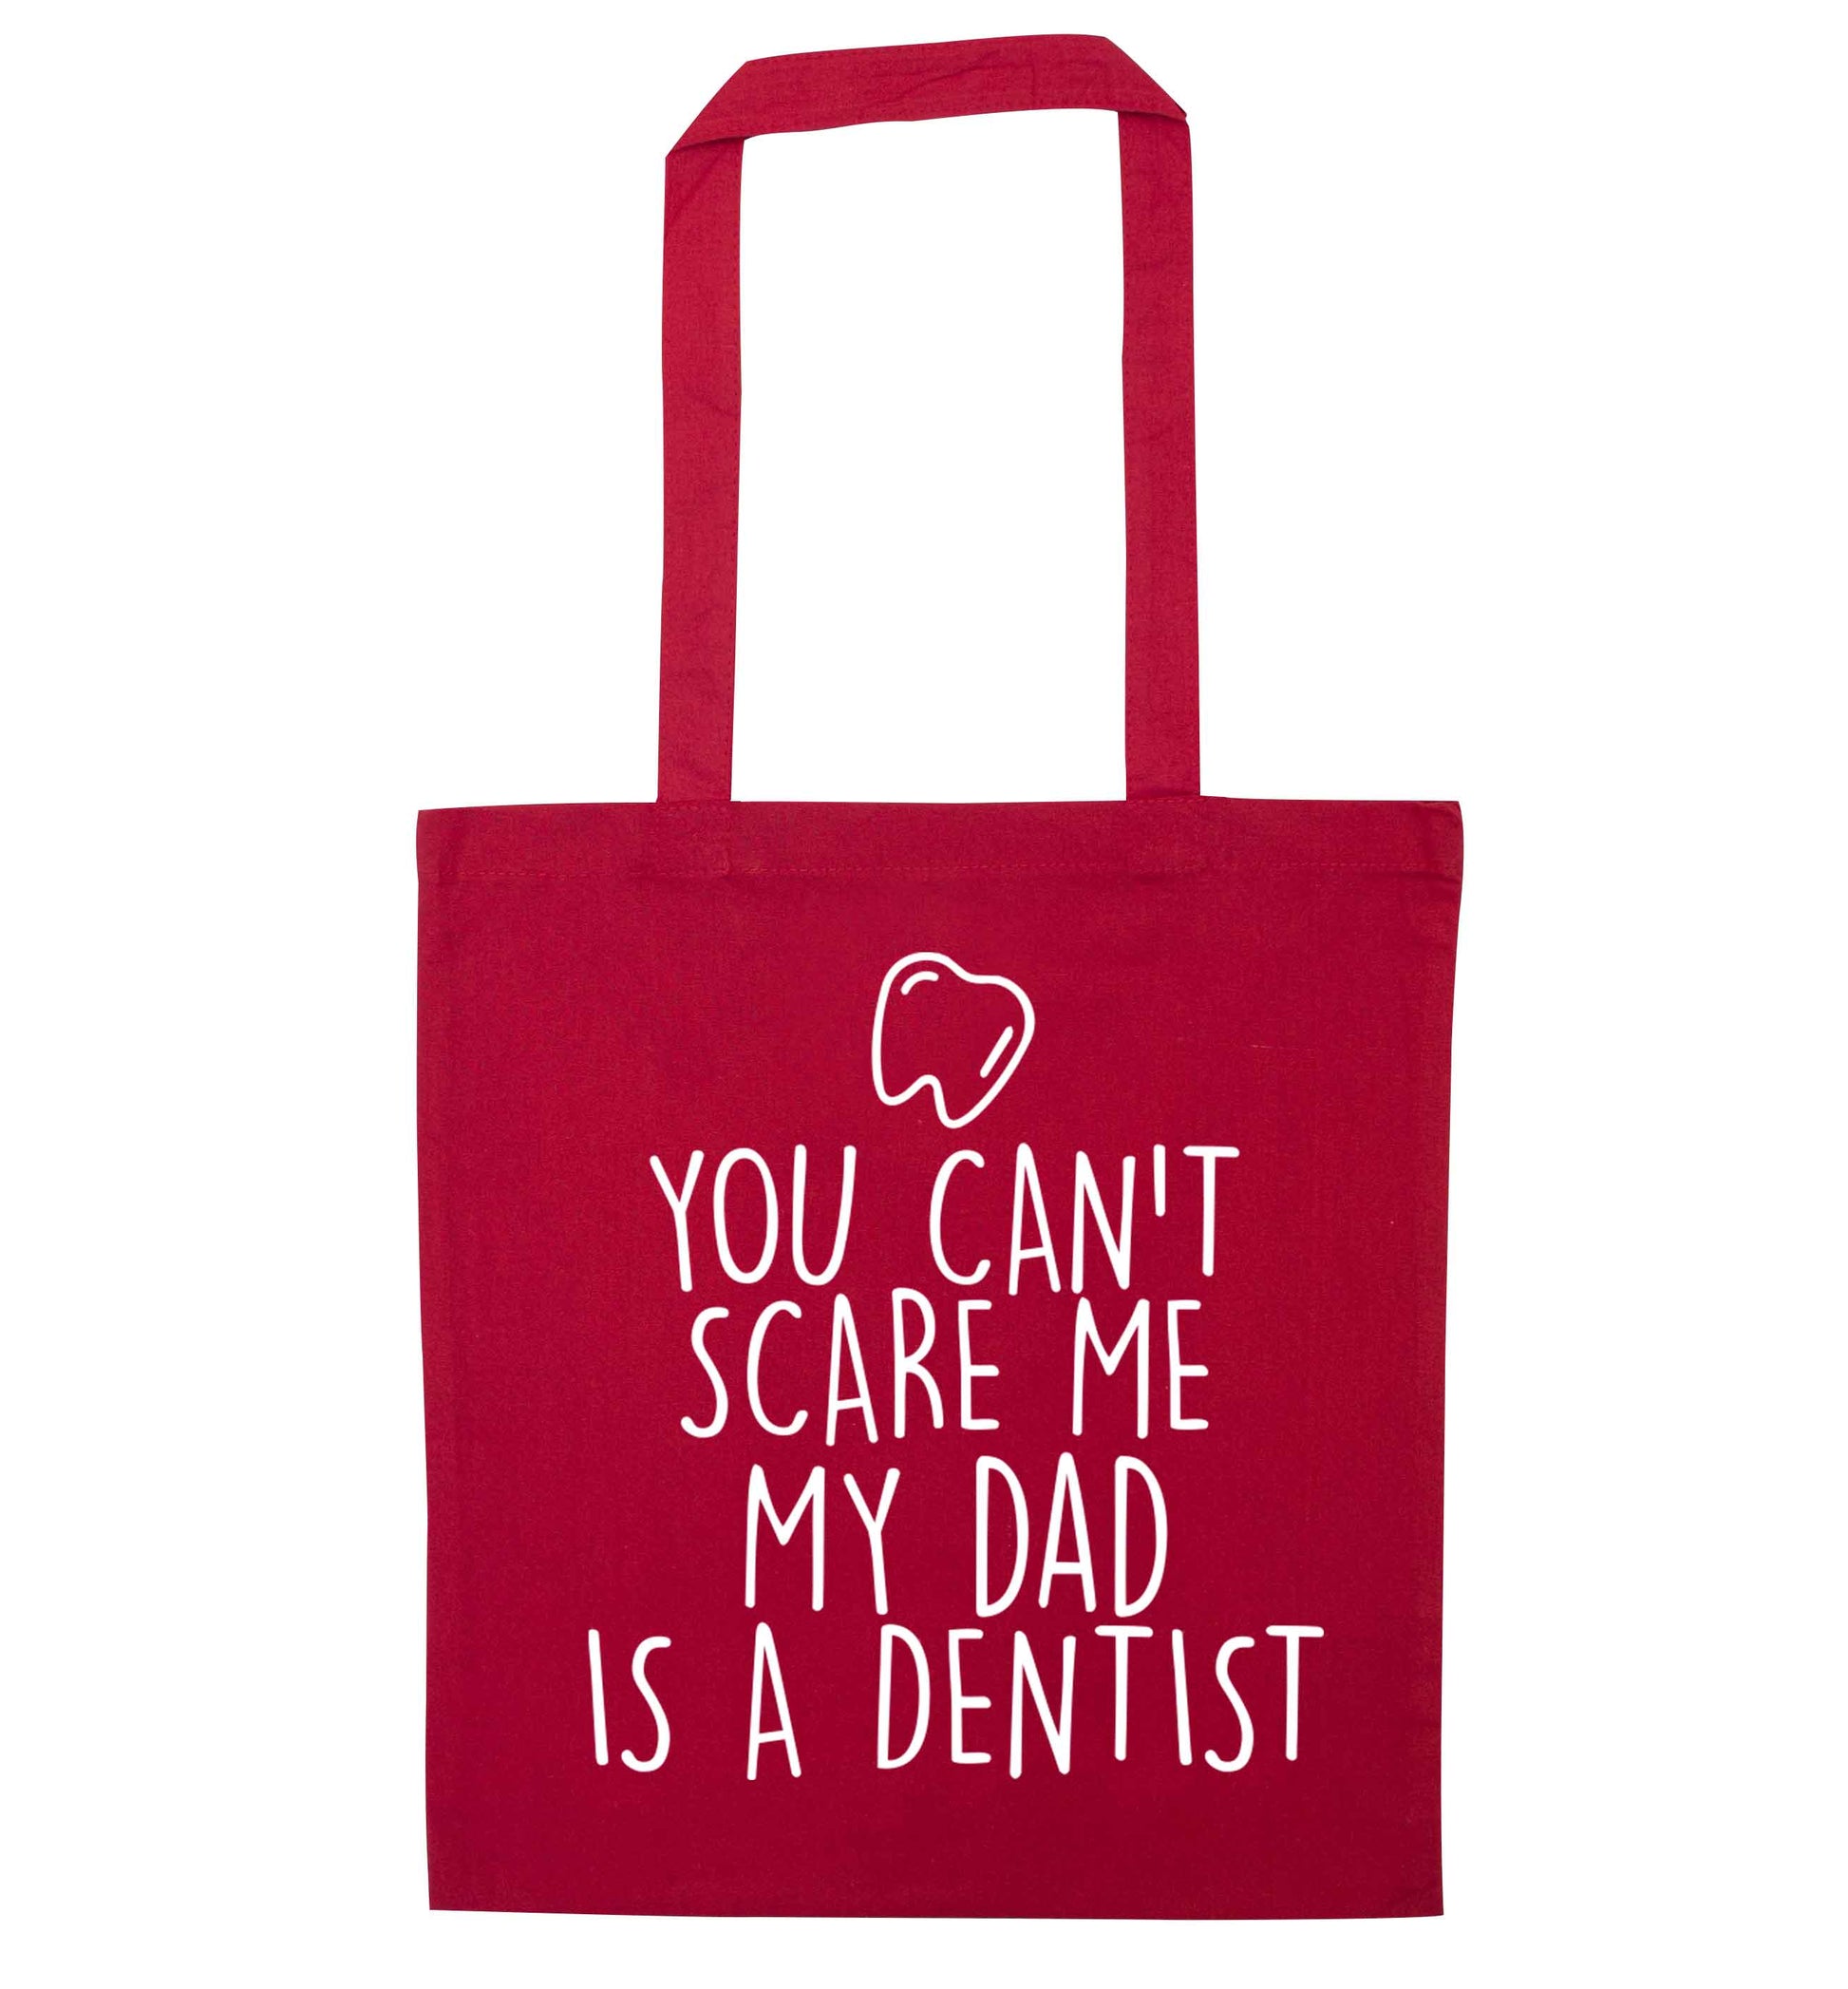 You can't scare me my dad is a dentist red tote bag